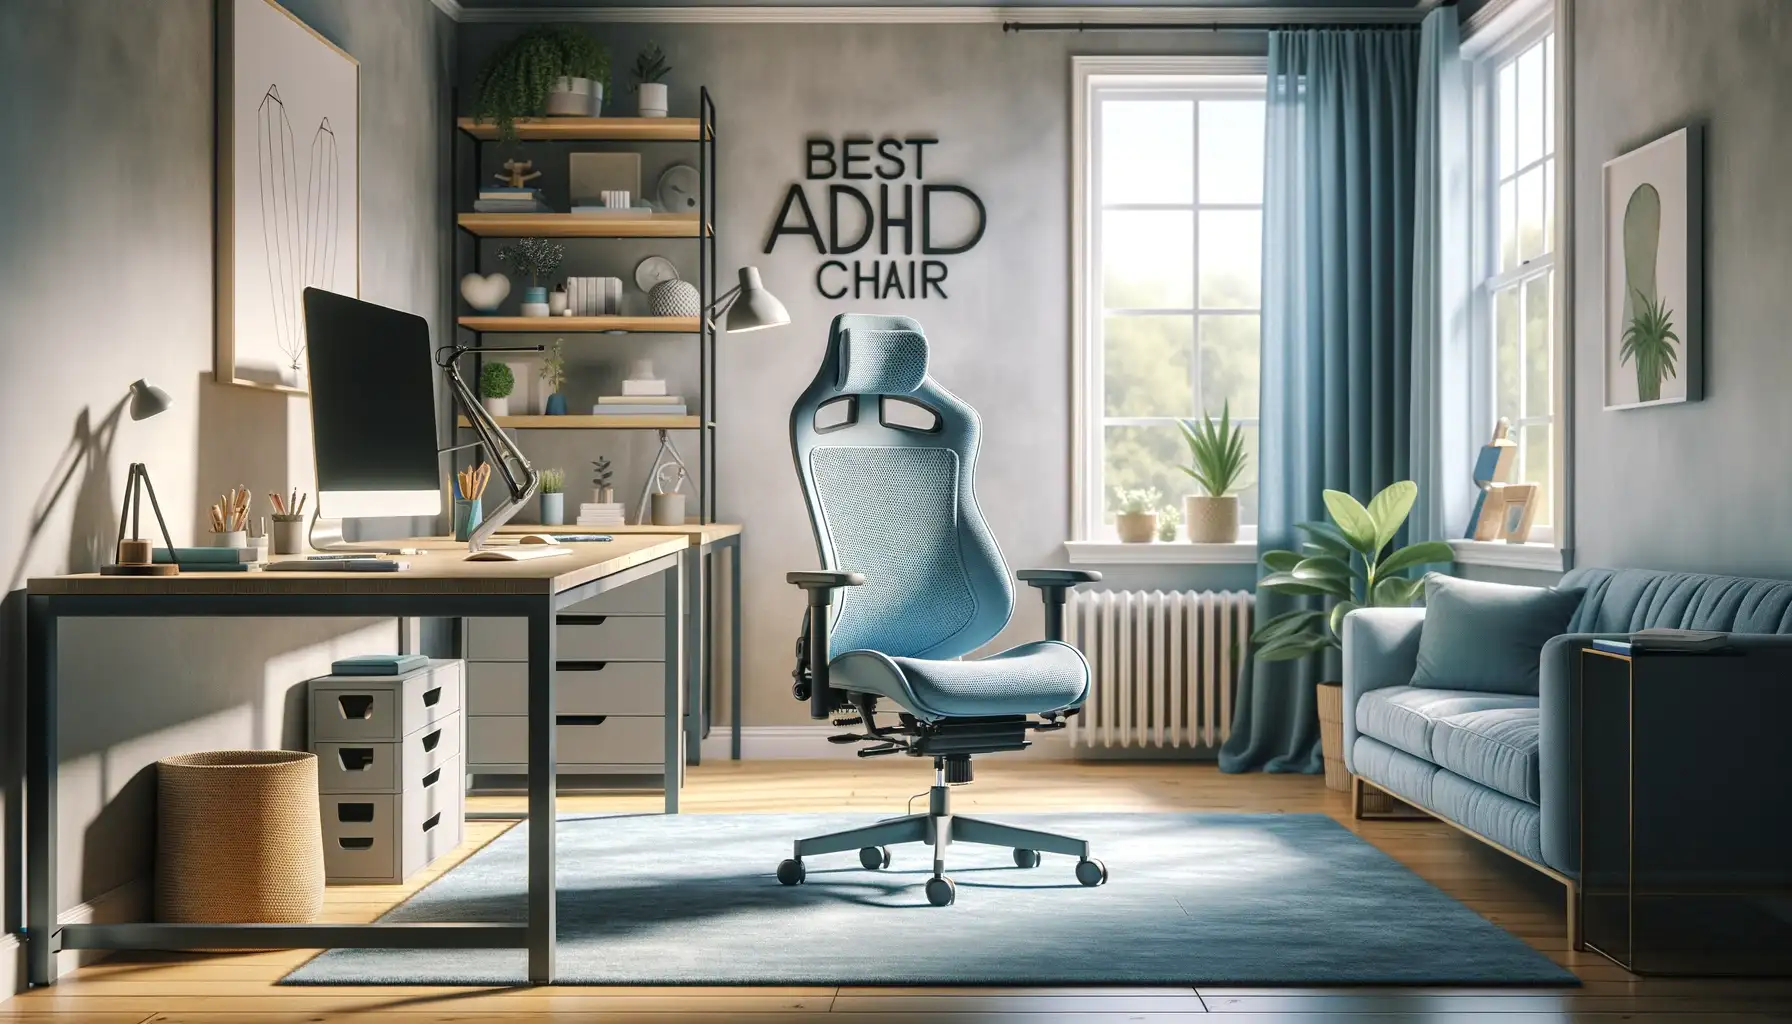 ADHD Chairs for Adults